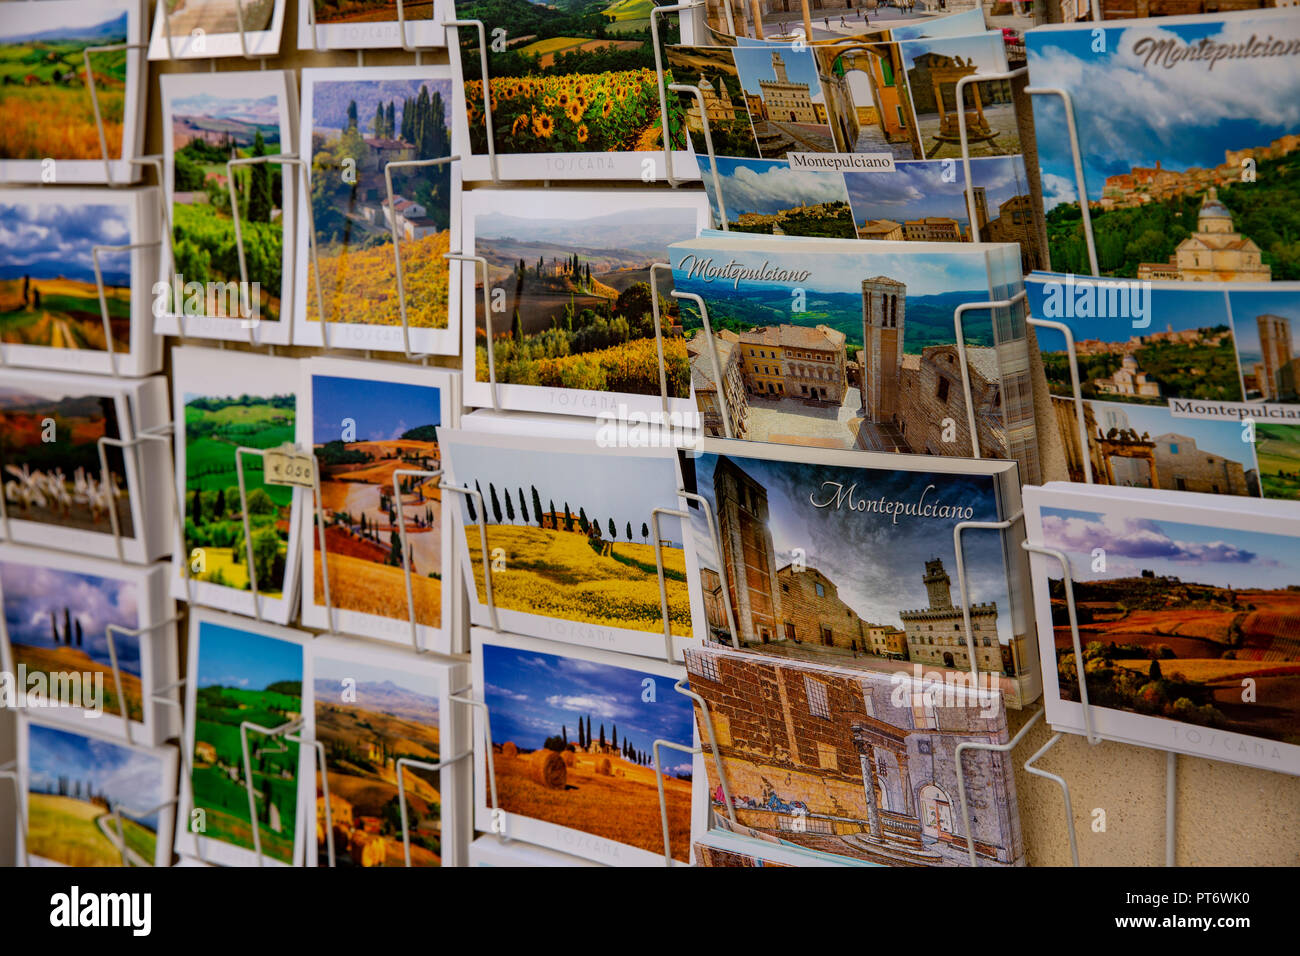 Postcards for sale at a small shop in the Tuscan hilltop town of Montepulciano,Tuscany,Italy Stock Photo